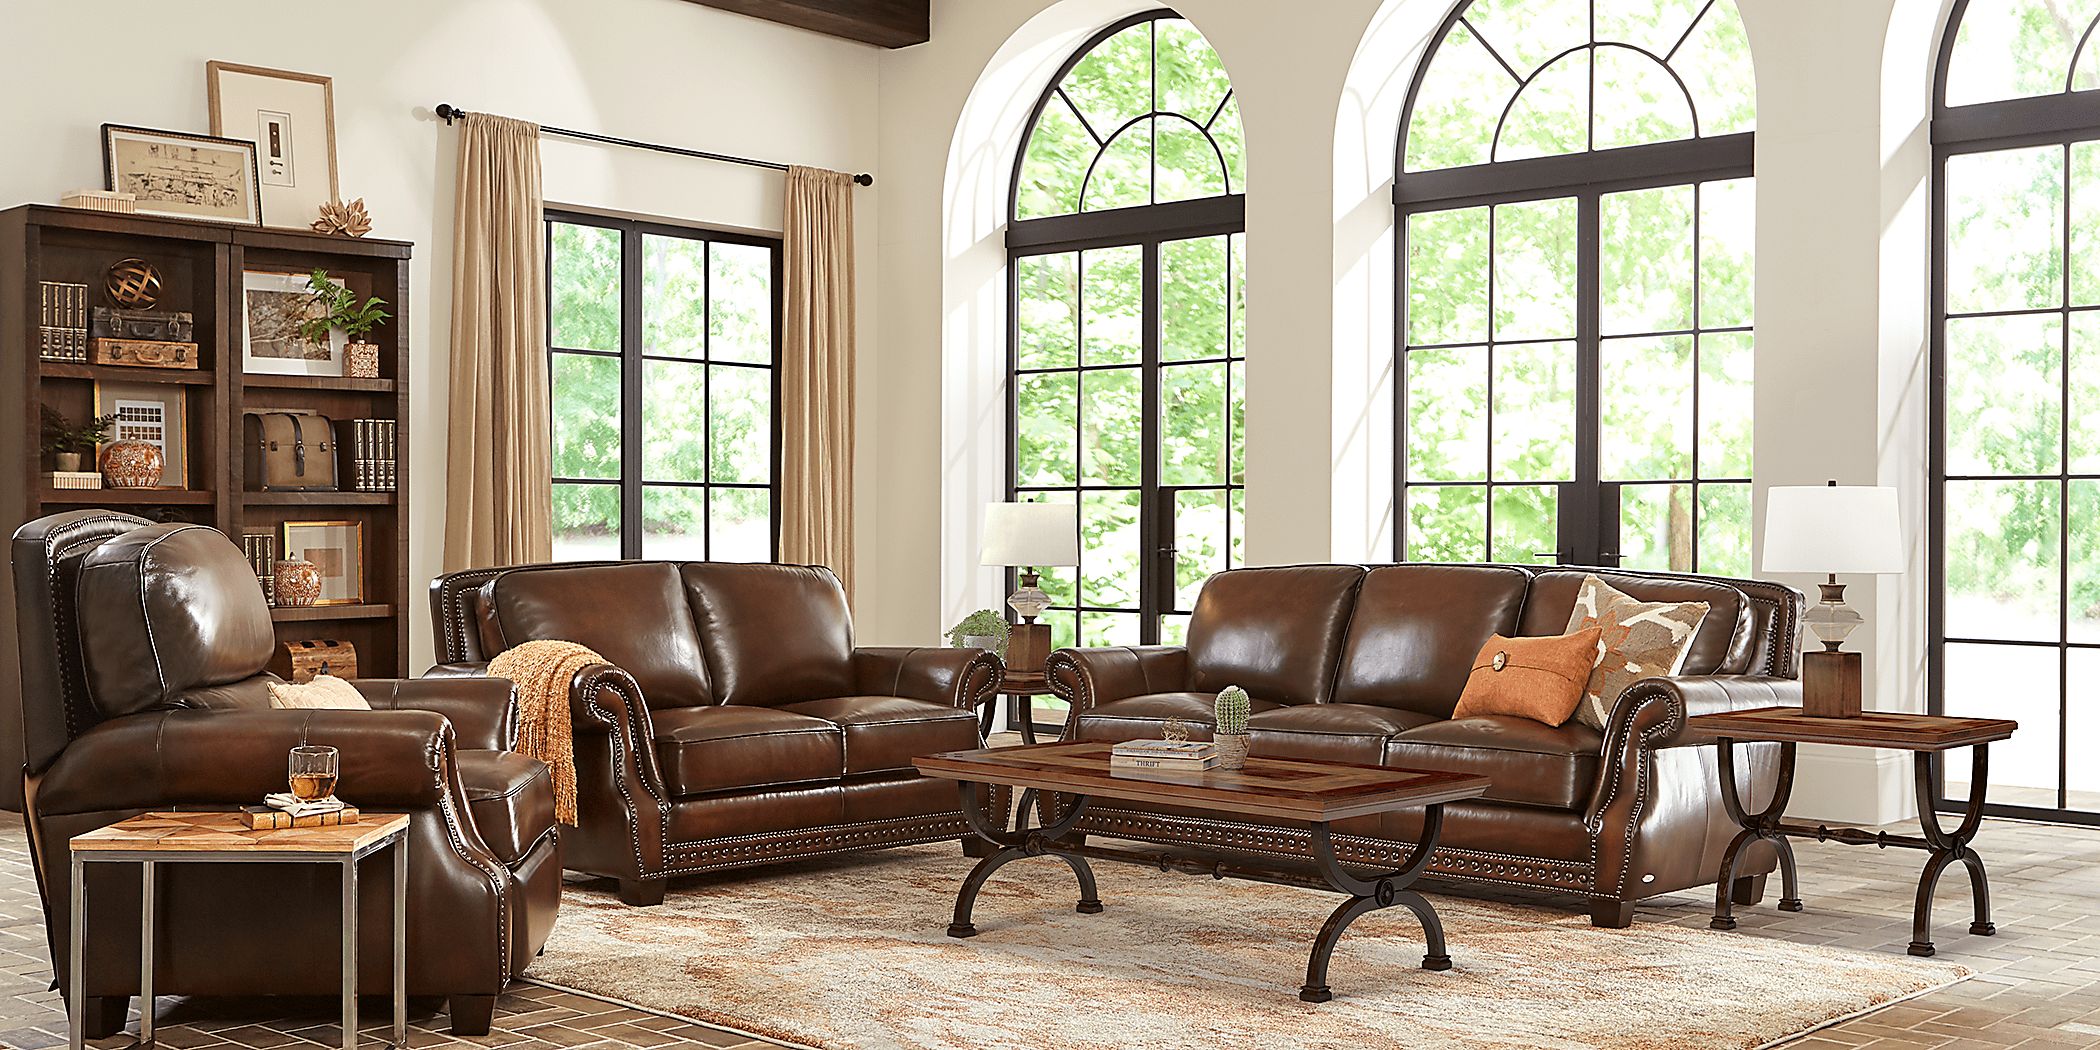 brown leather couh living room design